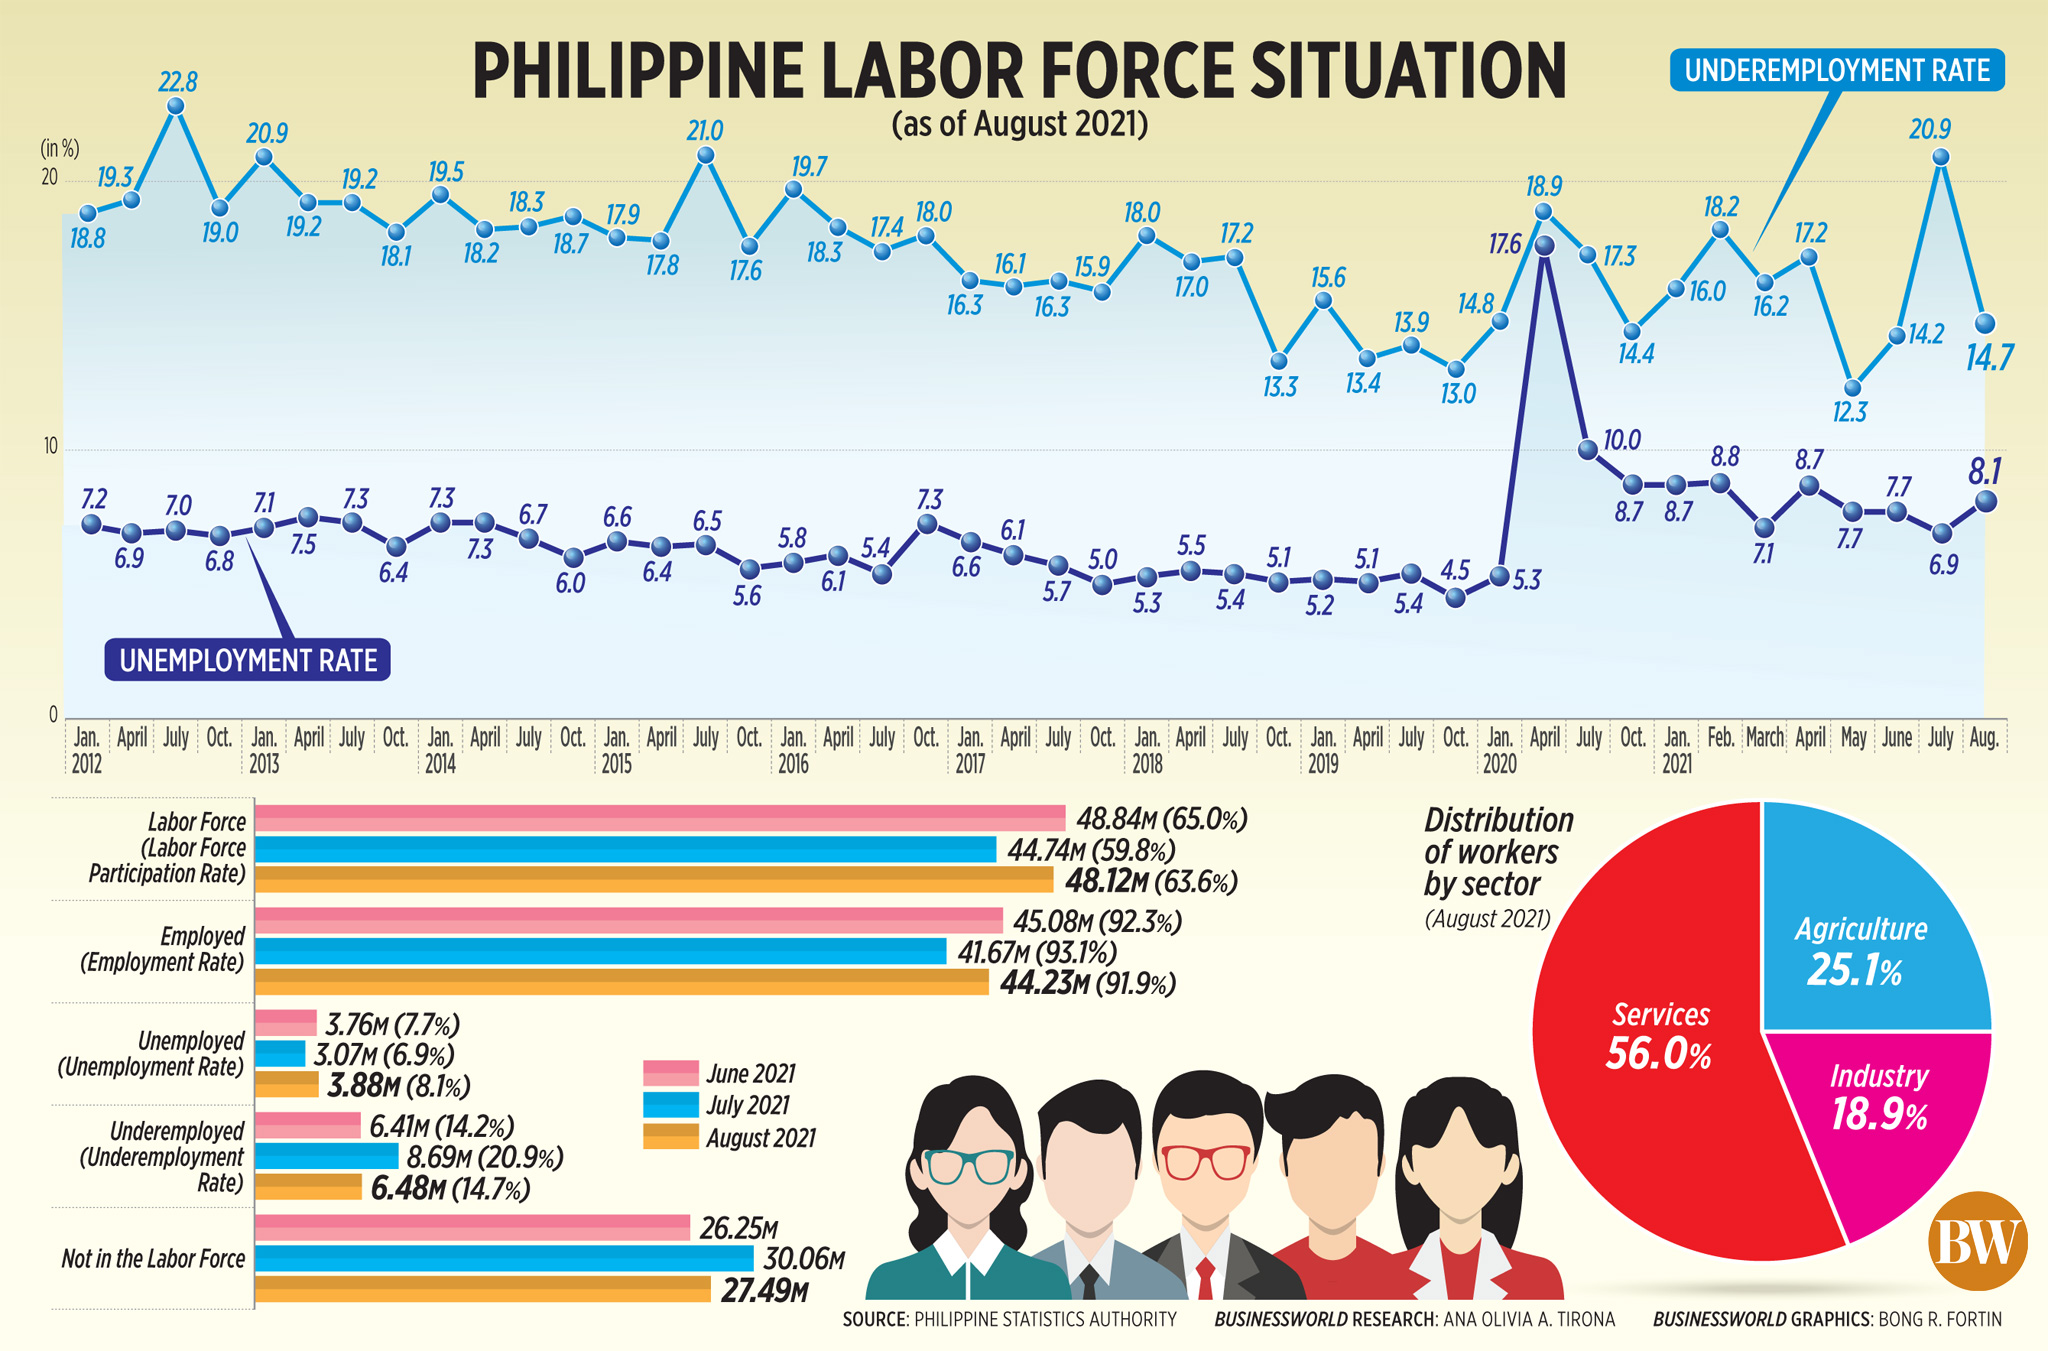 Philippine labor force situation (as of August 2021)